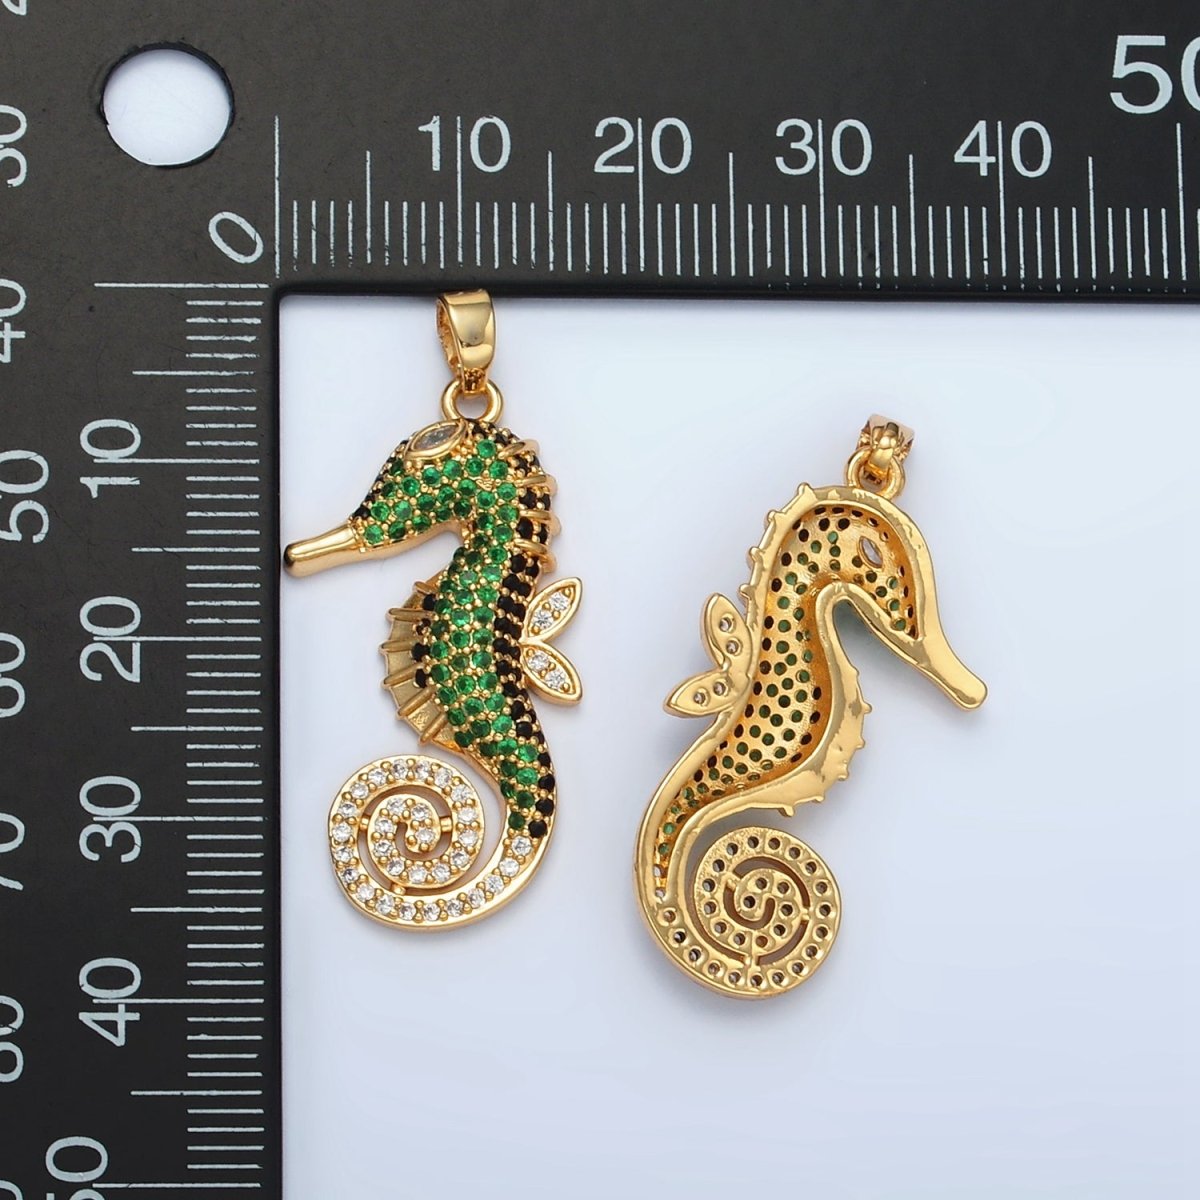 24K Gold Filled Green Micro Paved Sea Horse Ocean Animal Pendant | I288 - DLUXCA